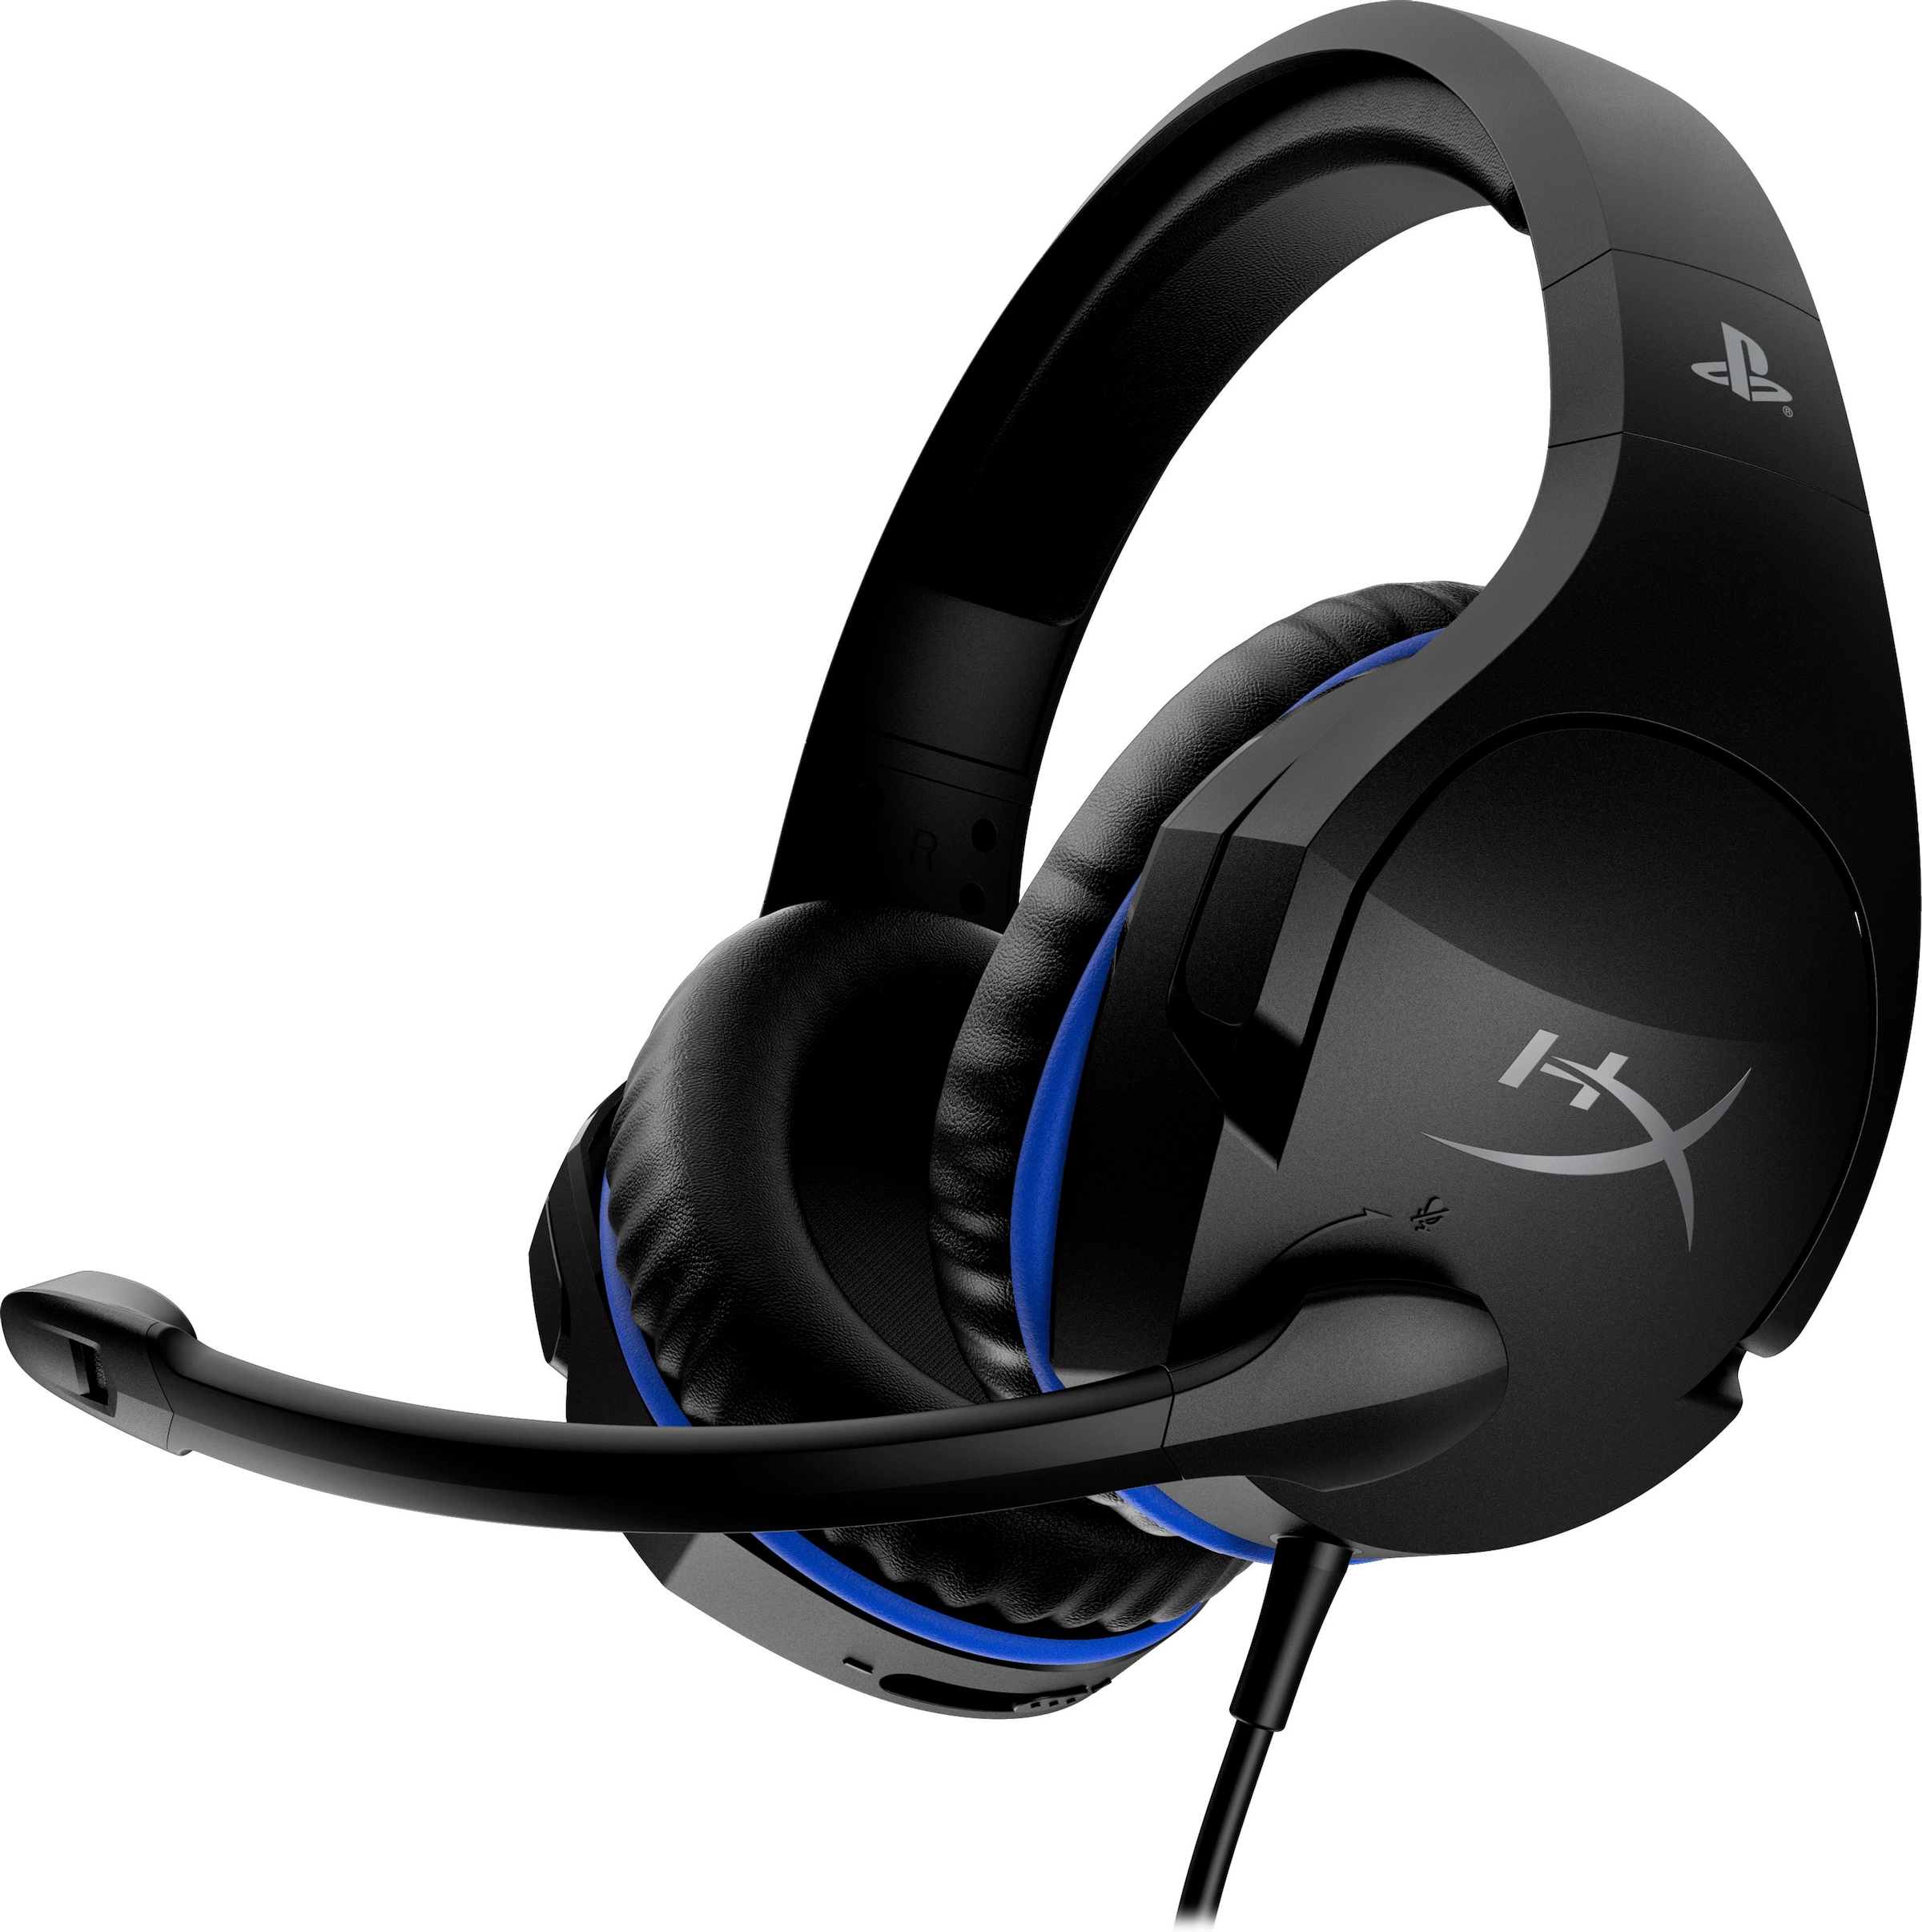 Mikrofon jetzt Stinger »Cloud bei abnehmbar (PS4 Licensed)«, HyperX Gaming-Headset OTTO